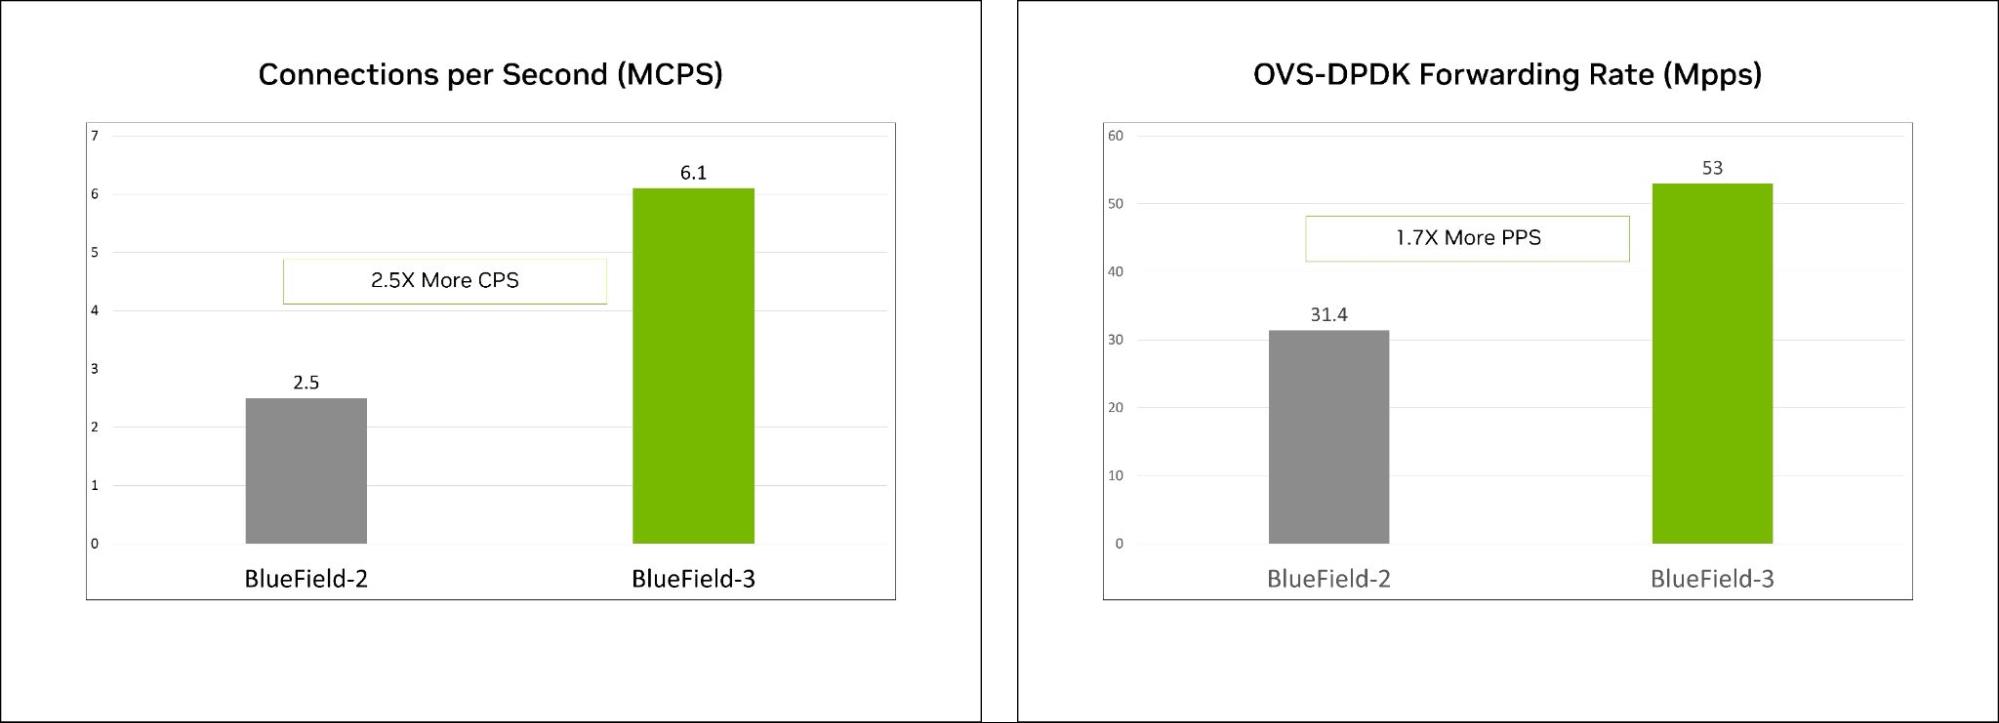 Test results comparing the NVIDIA BlueField-3 DPU to its previous generation (BlueField-2) show BlueField-3 provides 2.5x more CPS and 1.7x more PPS.